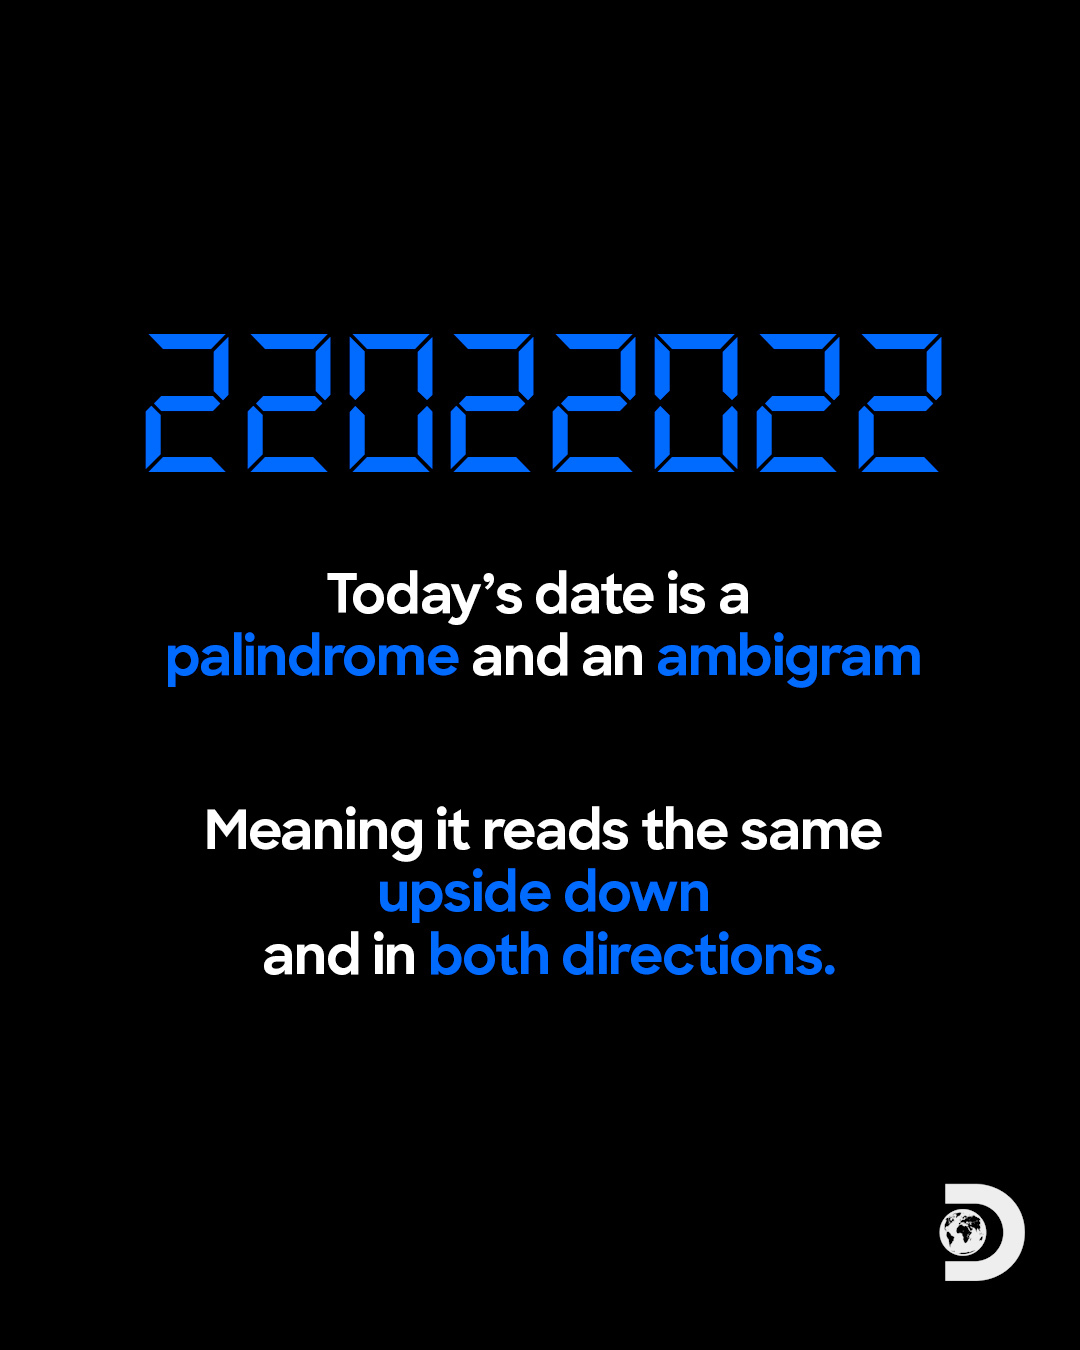 today's date is a palindrome and an ambigram, meaning it reads the same upside down and in both directions